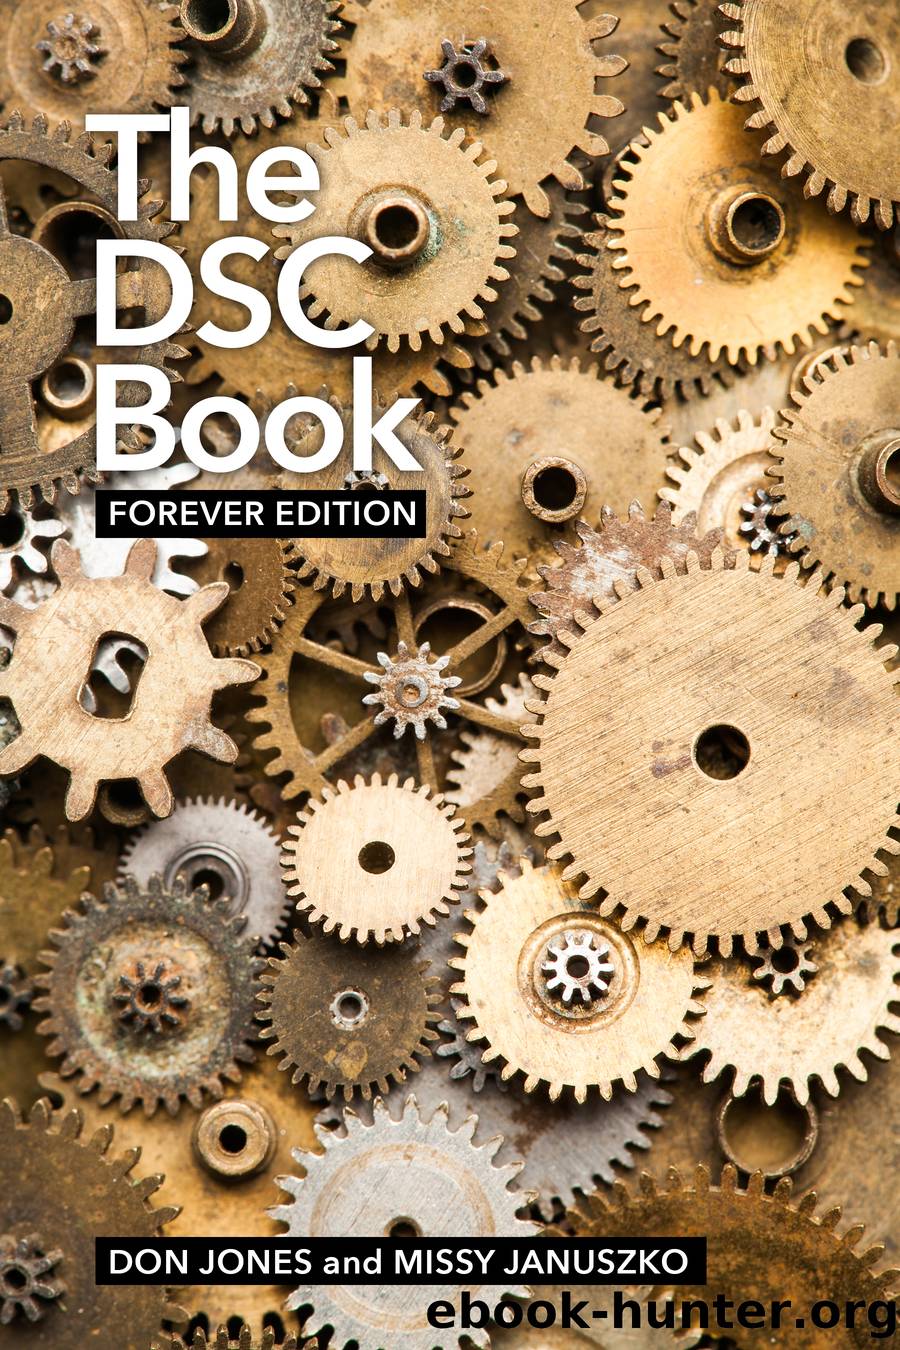 The DSC Book by Don Jones and Melissa Januszko